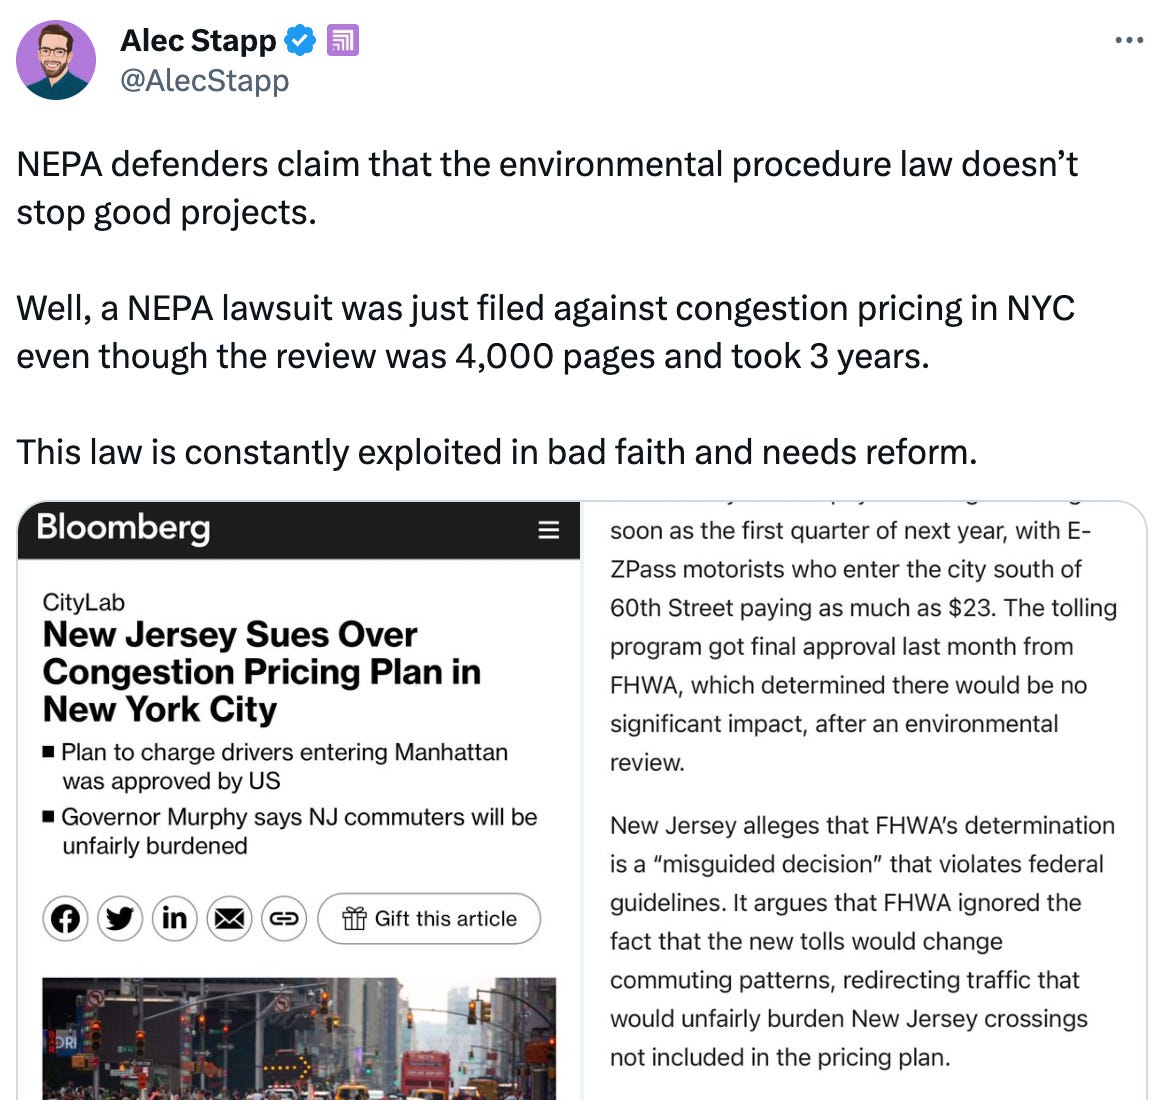  See new Tweets Conversation Alec Stapp  @AlecStapp NEPA defenders claim that the environmental procedure law doesn’t stop good projects.  Well, a NEPA lawsuit was just filed against congestion pricing in NYC even though the review was 4,000 pages and took 3 years.  This law is constantly exploited in bad faith and needs reform.